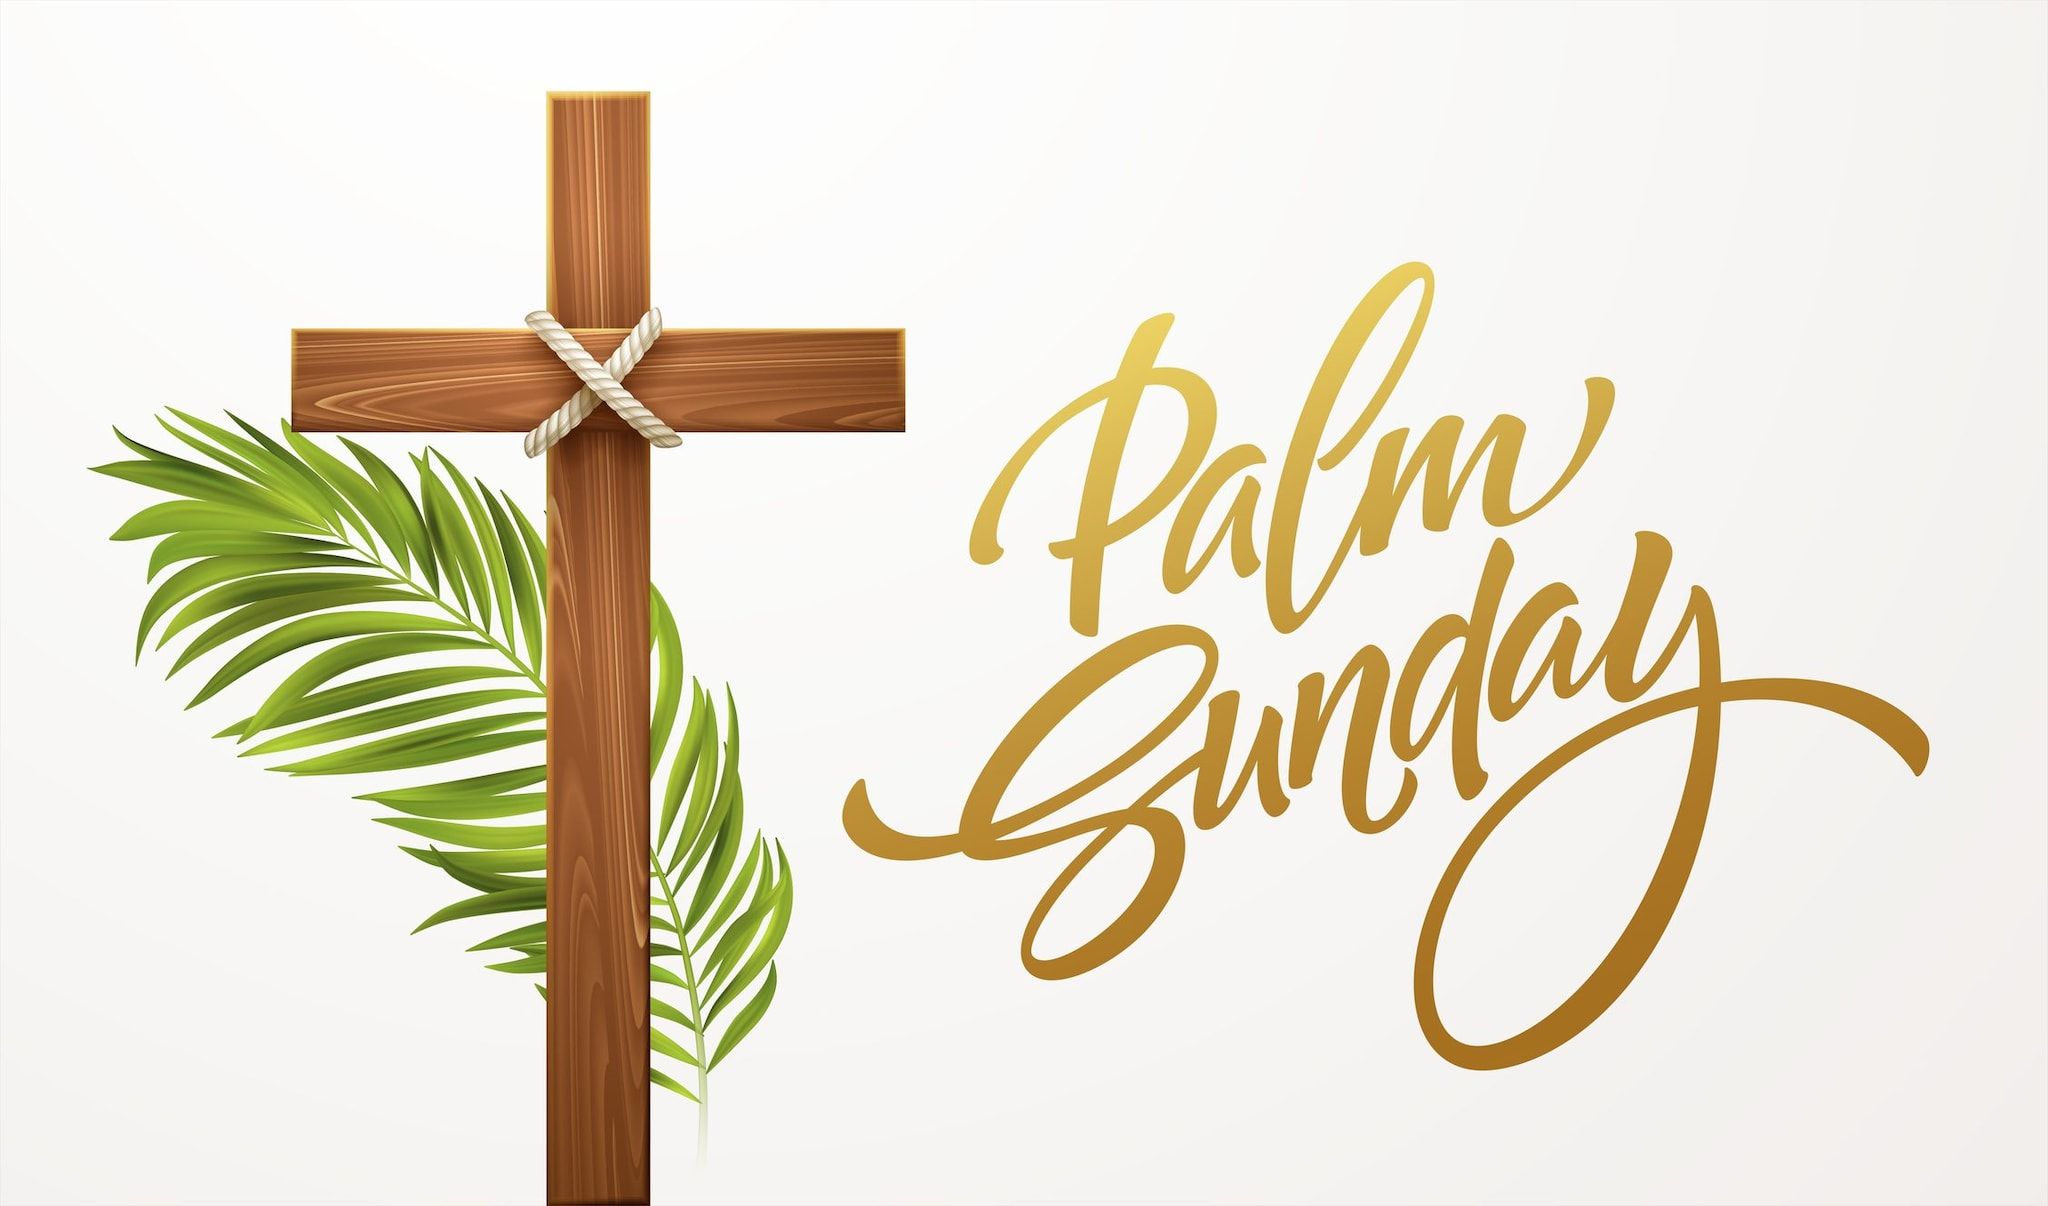 Happy Palm Sunday 2023, the most beautiful images for greetings on